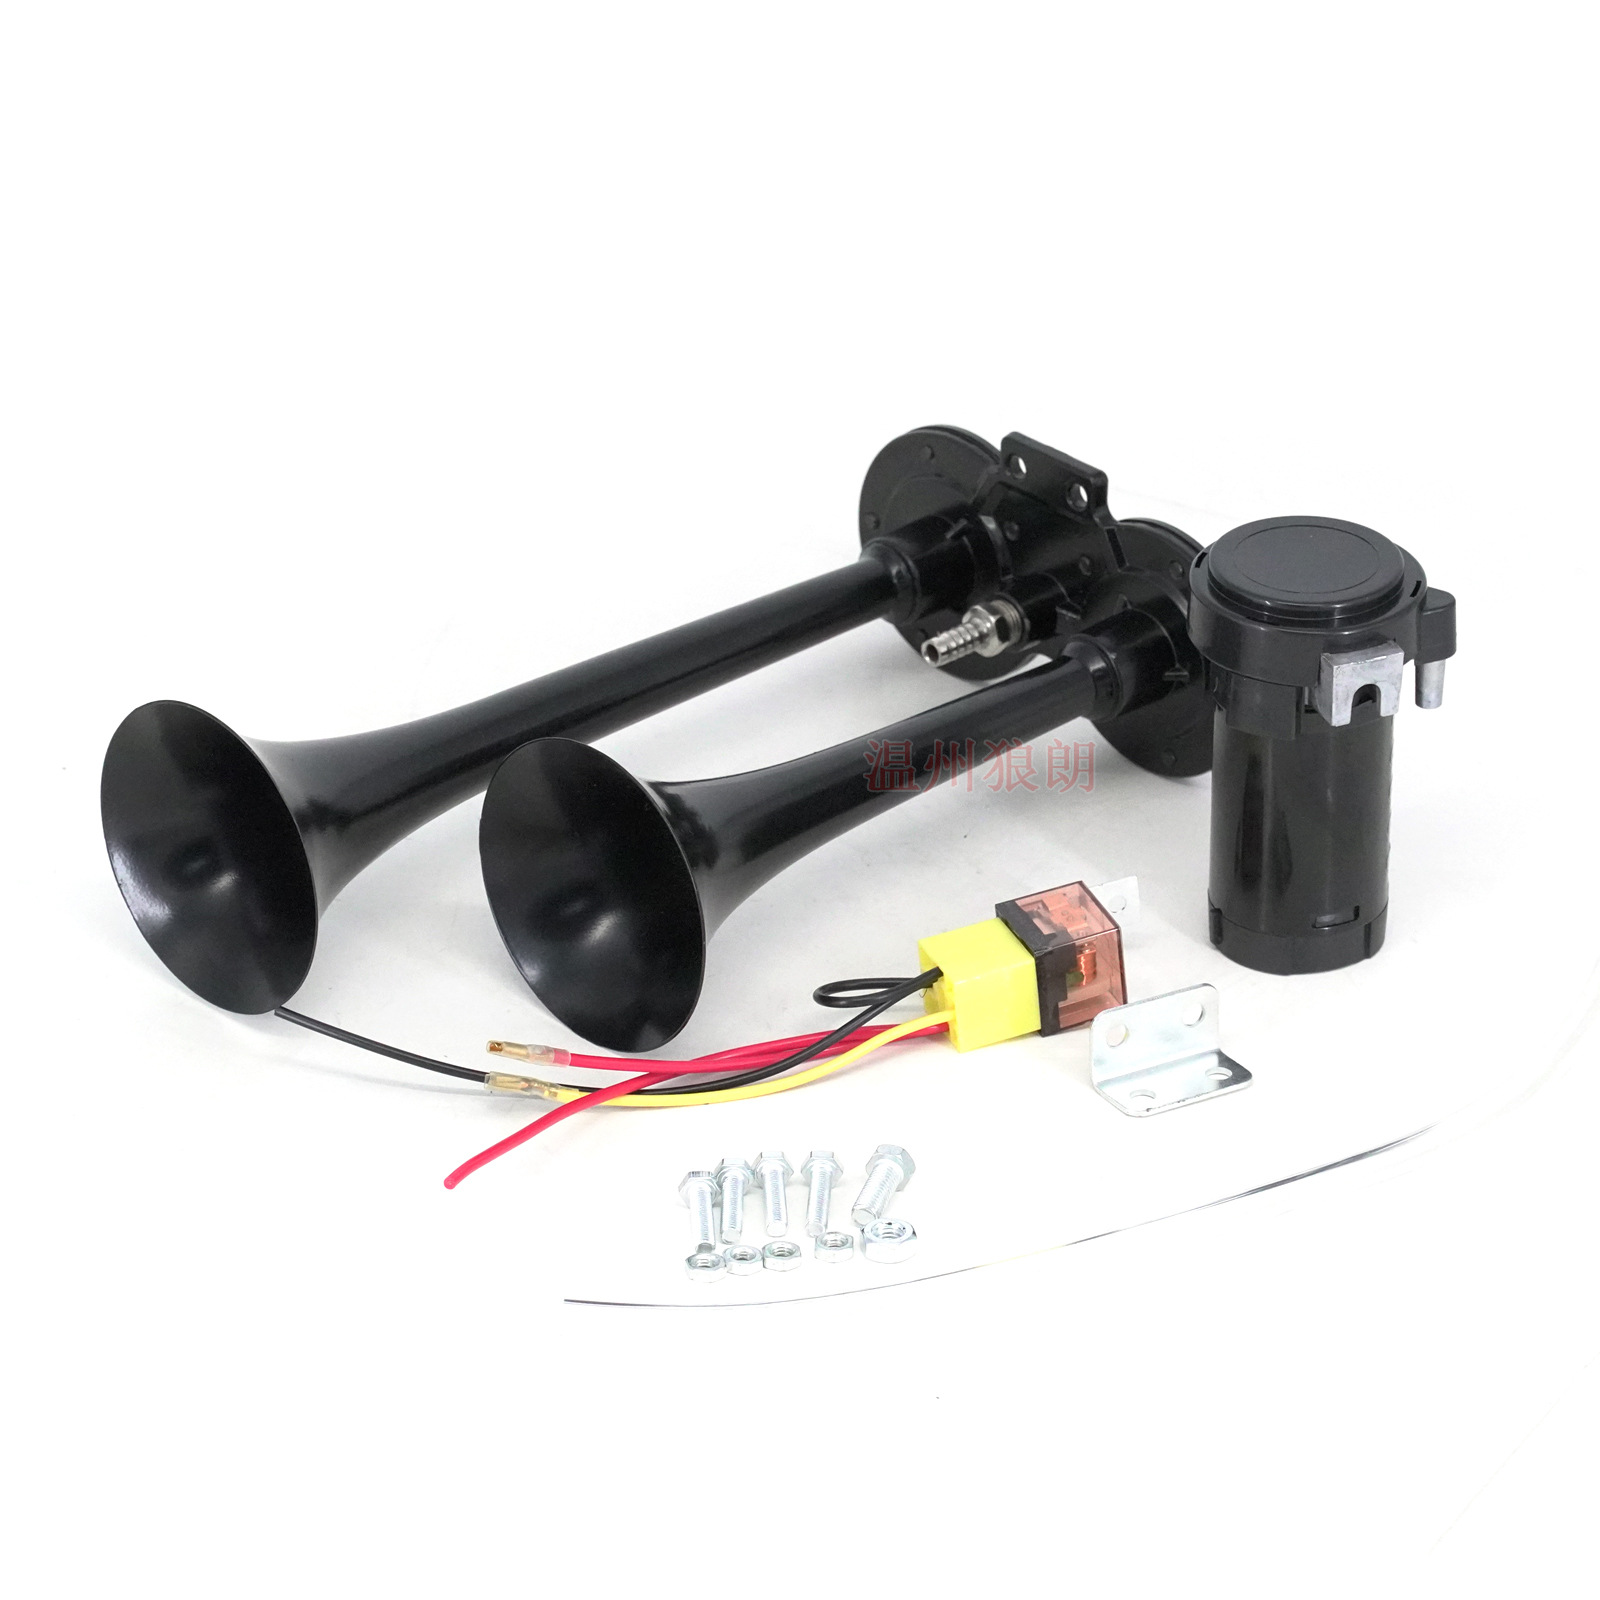 12V black double tube air horn pneumatic compression motor air pump with relay car truck tweeter